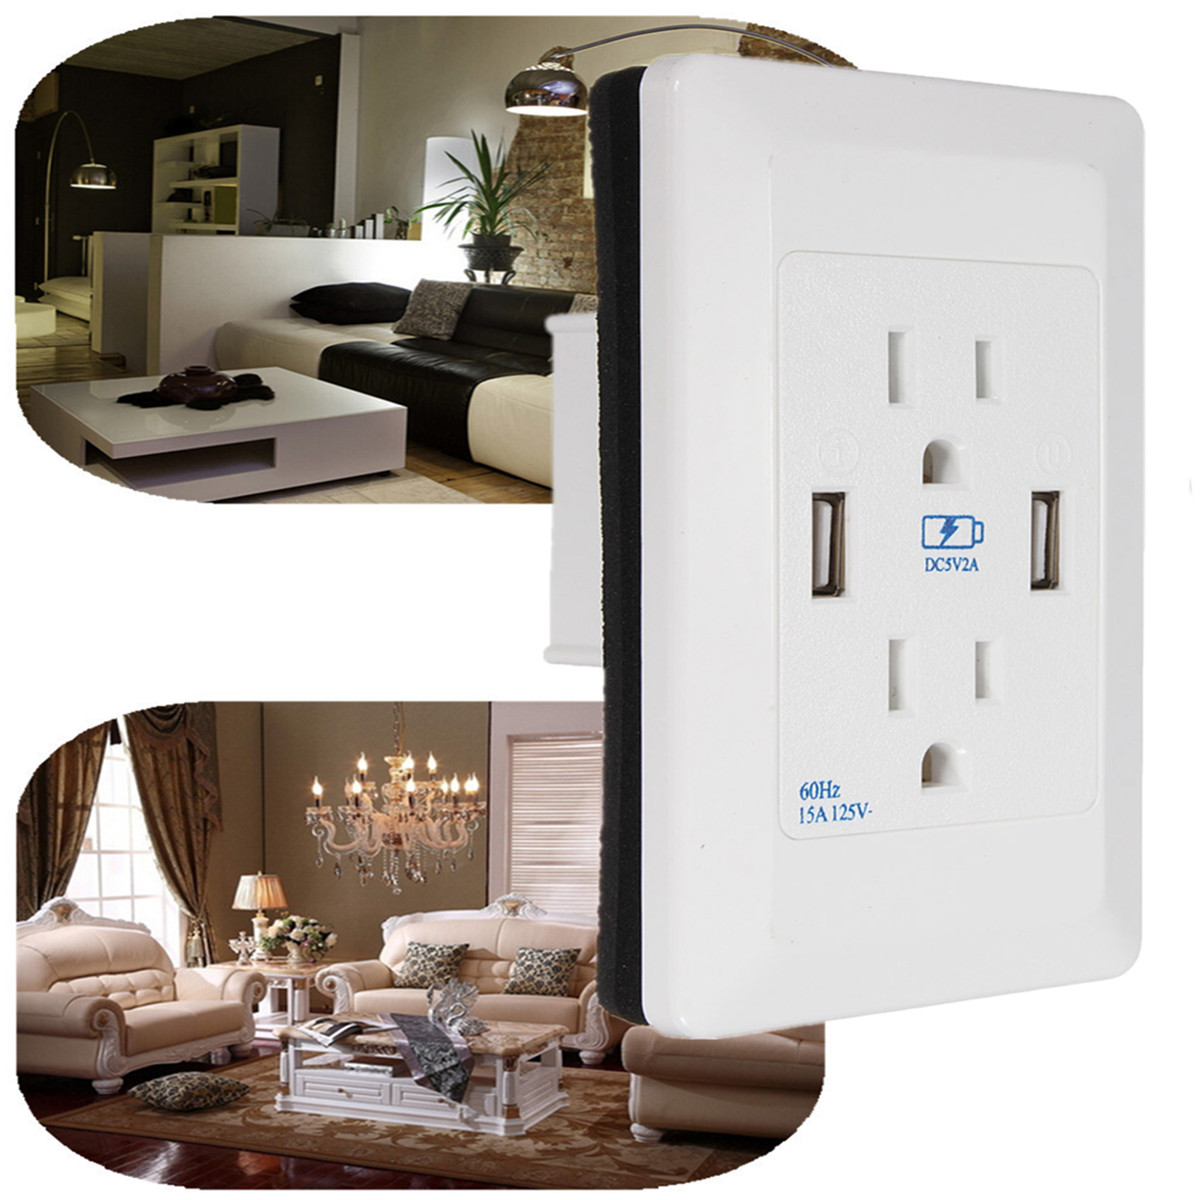 AC-Wall-Socket-Power-Adapter-Receptacle-2-Port-USB-Charger-Panel-Outlet-Plate-1951337-2